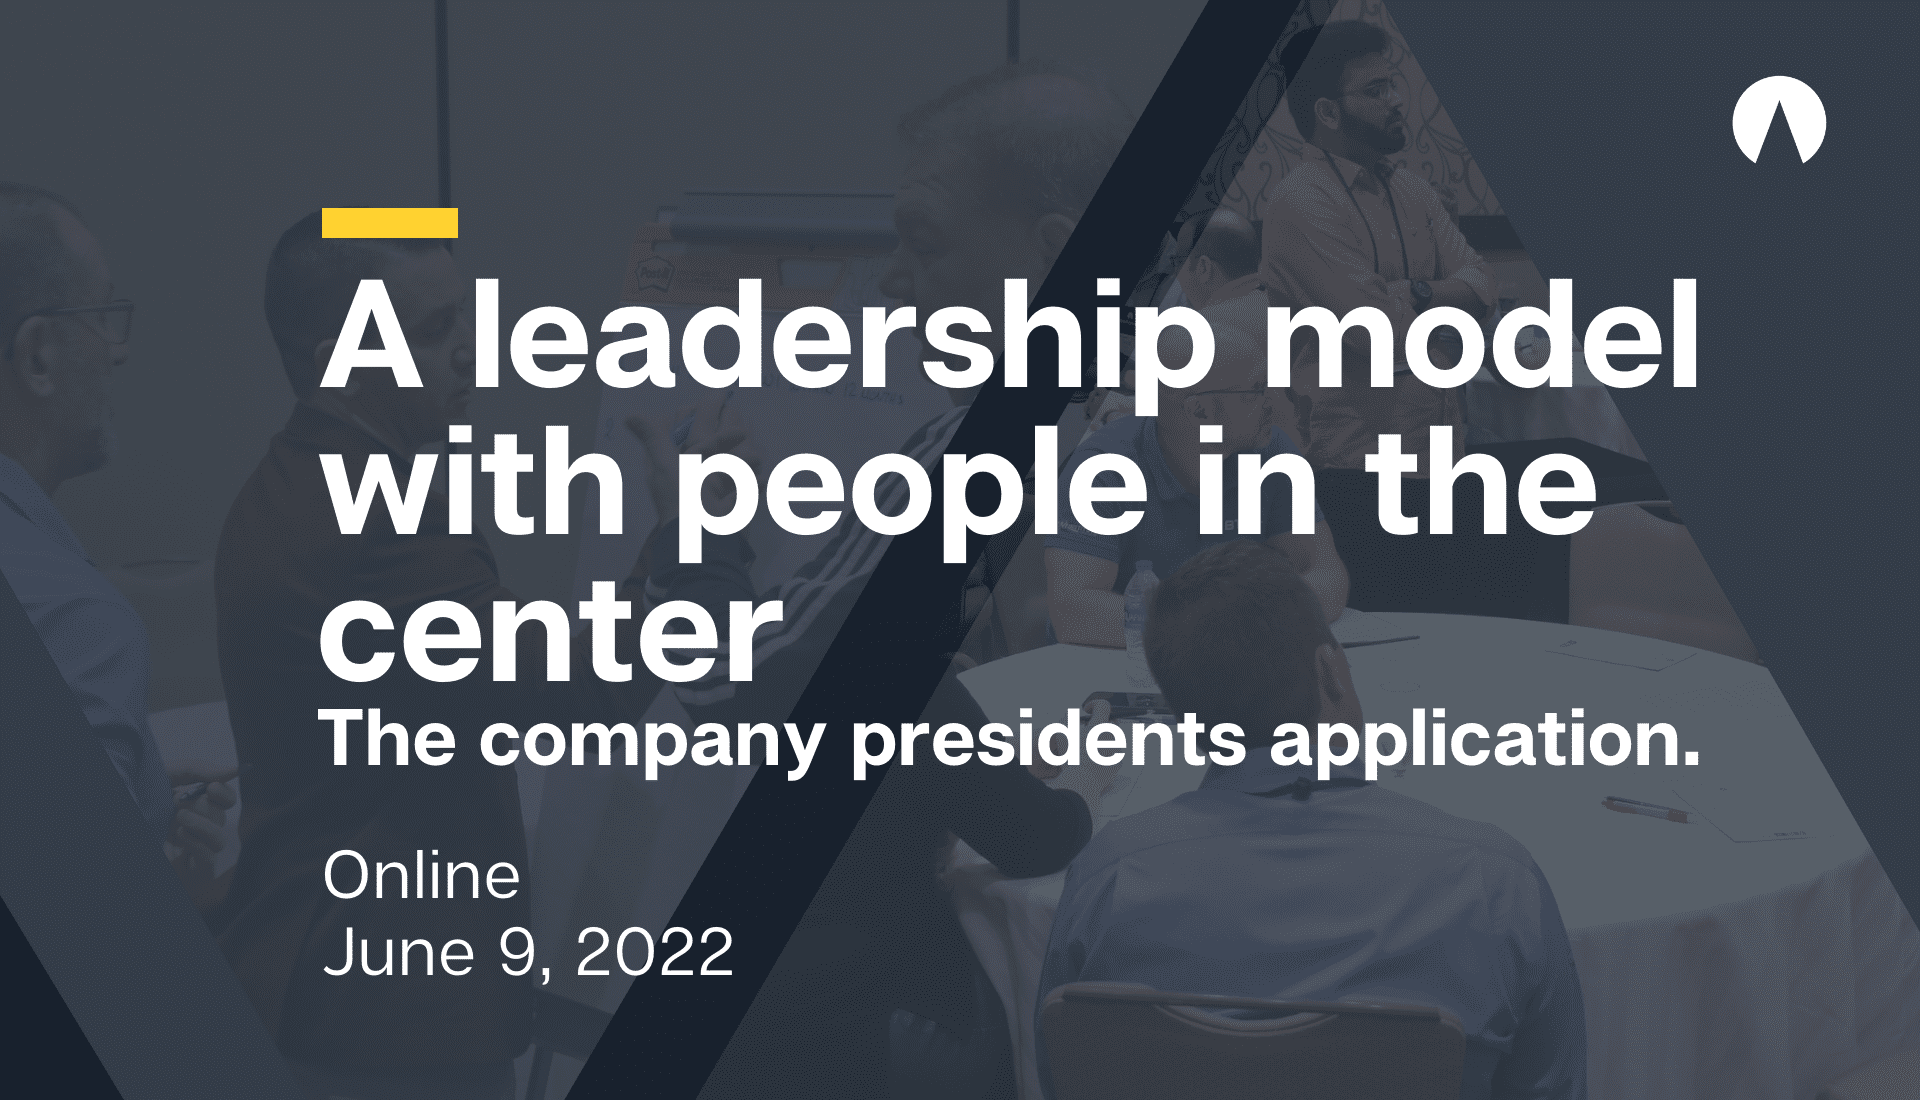 A leadership model with people in the center.